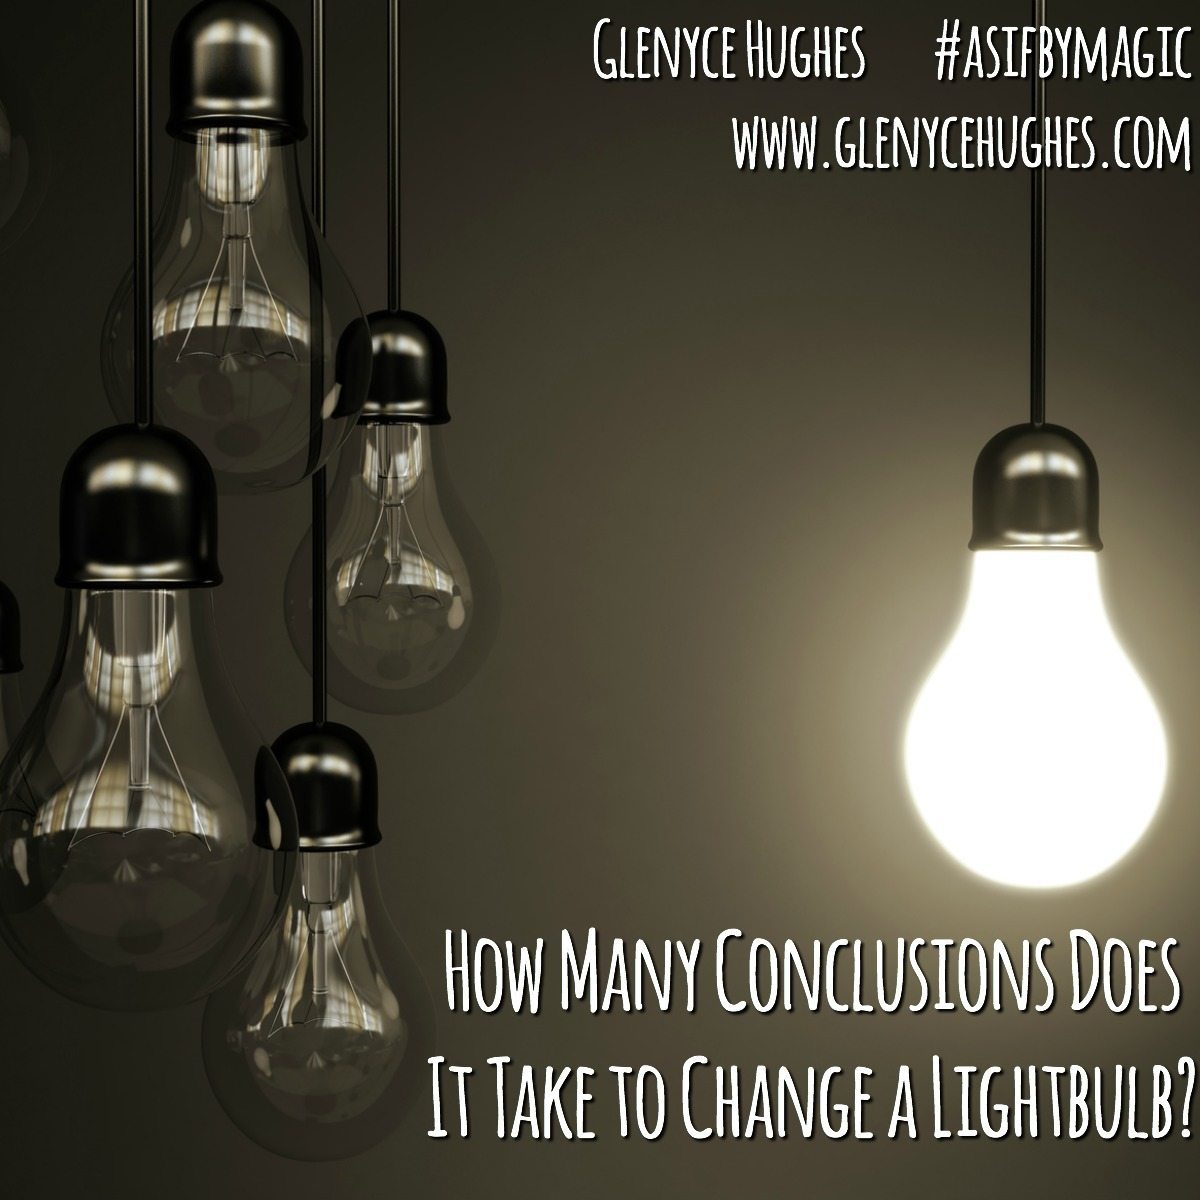 How Many Conclusions Does it Take to Change a Light Bulb?